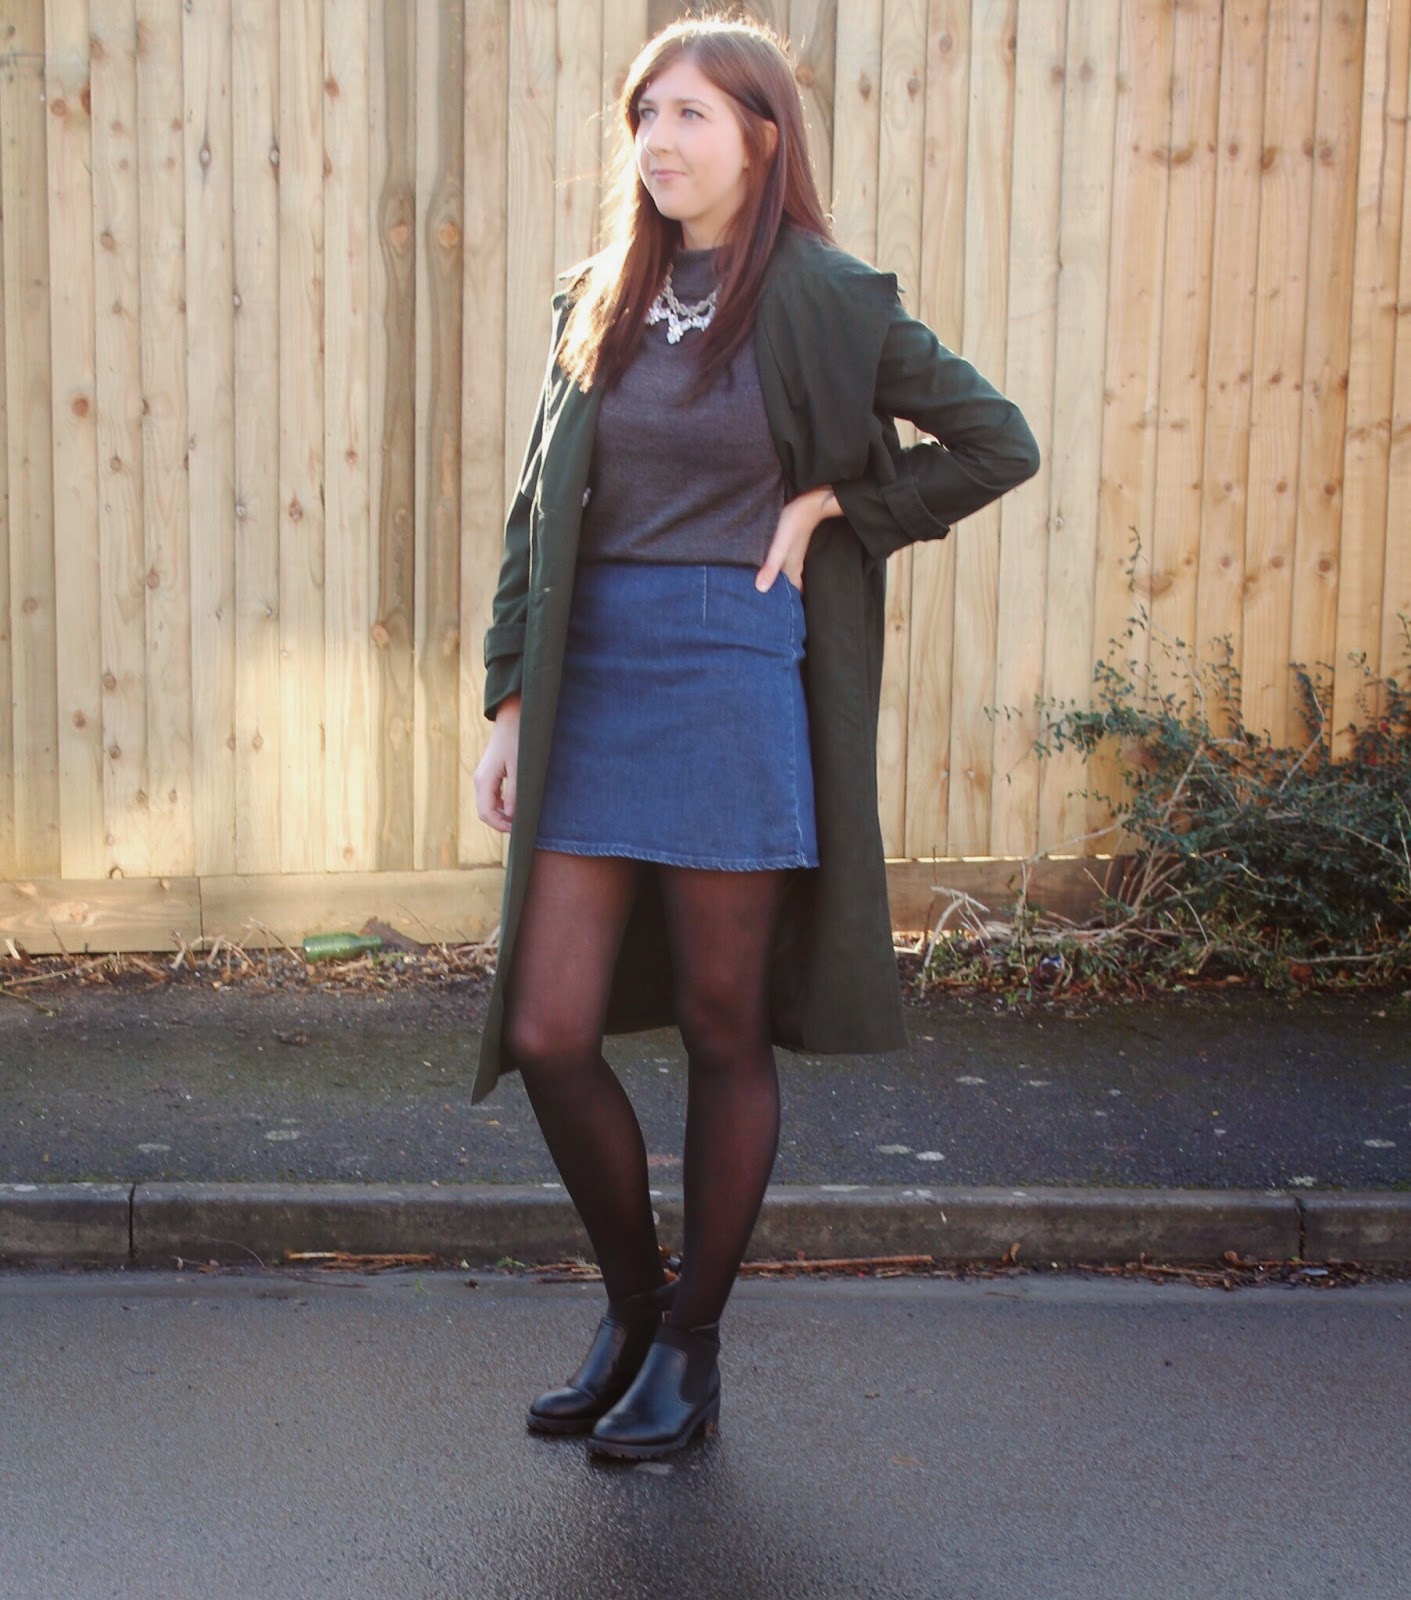 asseenonme, asos, primark, trenchcoat, wiw, whatimwearing, ootd, outfitoftheday, lotd, lookoftheday, alineskirt, denimskirt, rollneck, fbloggers, fblogger, fashionbloggers, fashion, chelseaboots, necklace,  halcyonevelvet